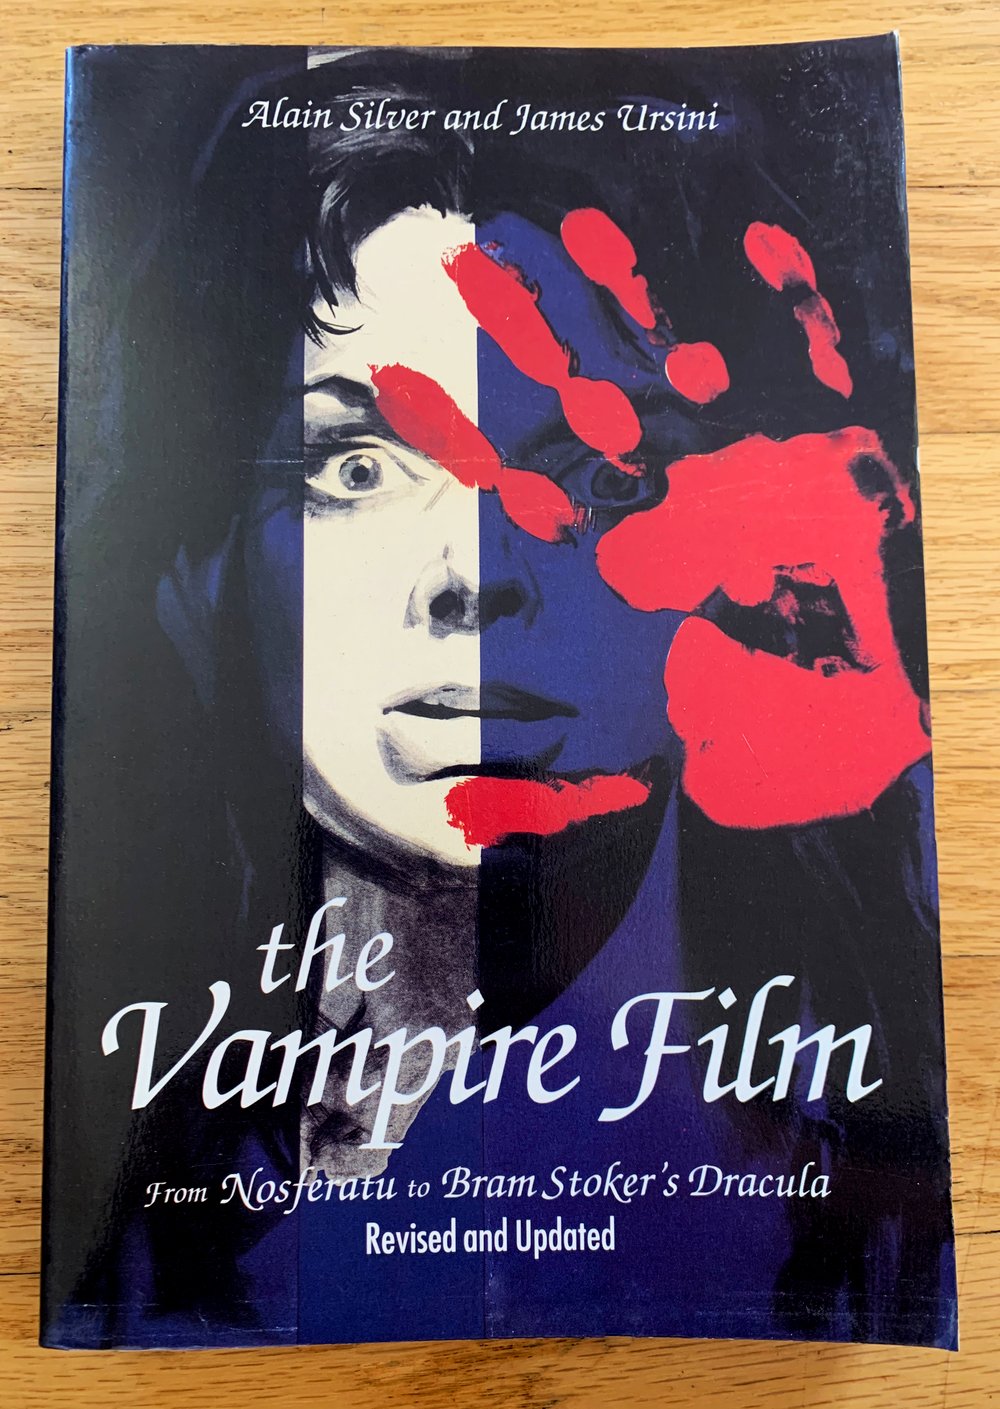 The Vampire Film- Lime light editions books by Alain Silver and James Ursini